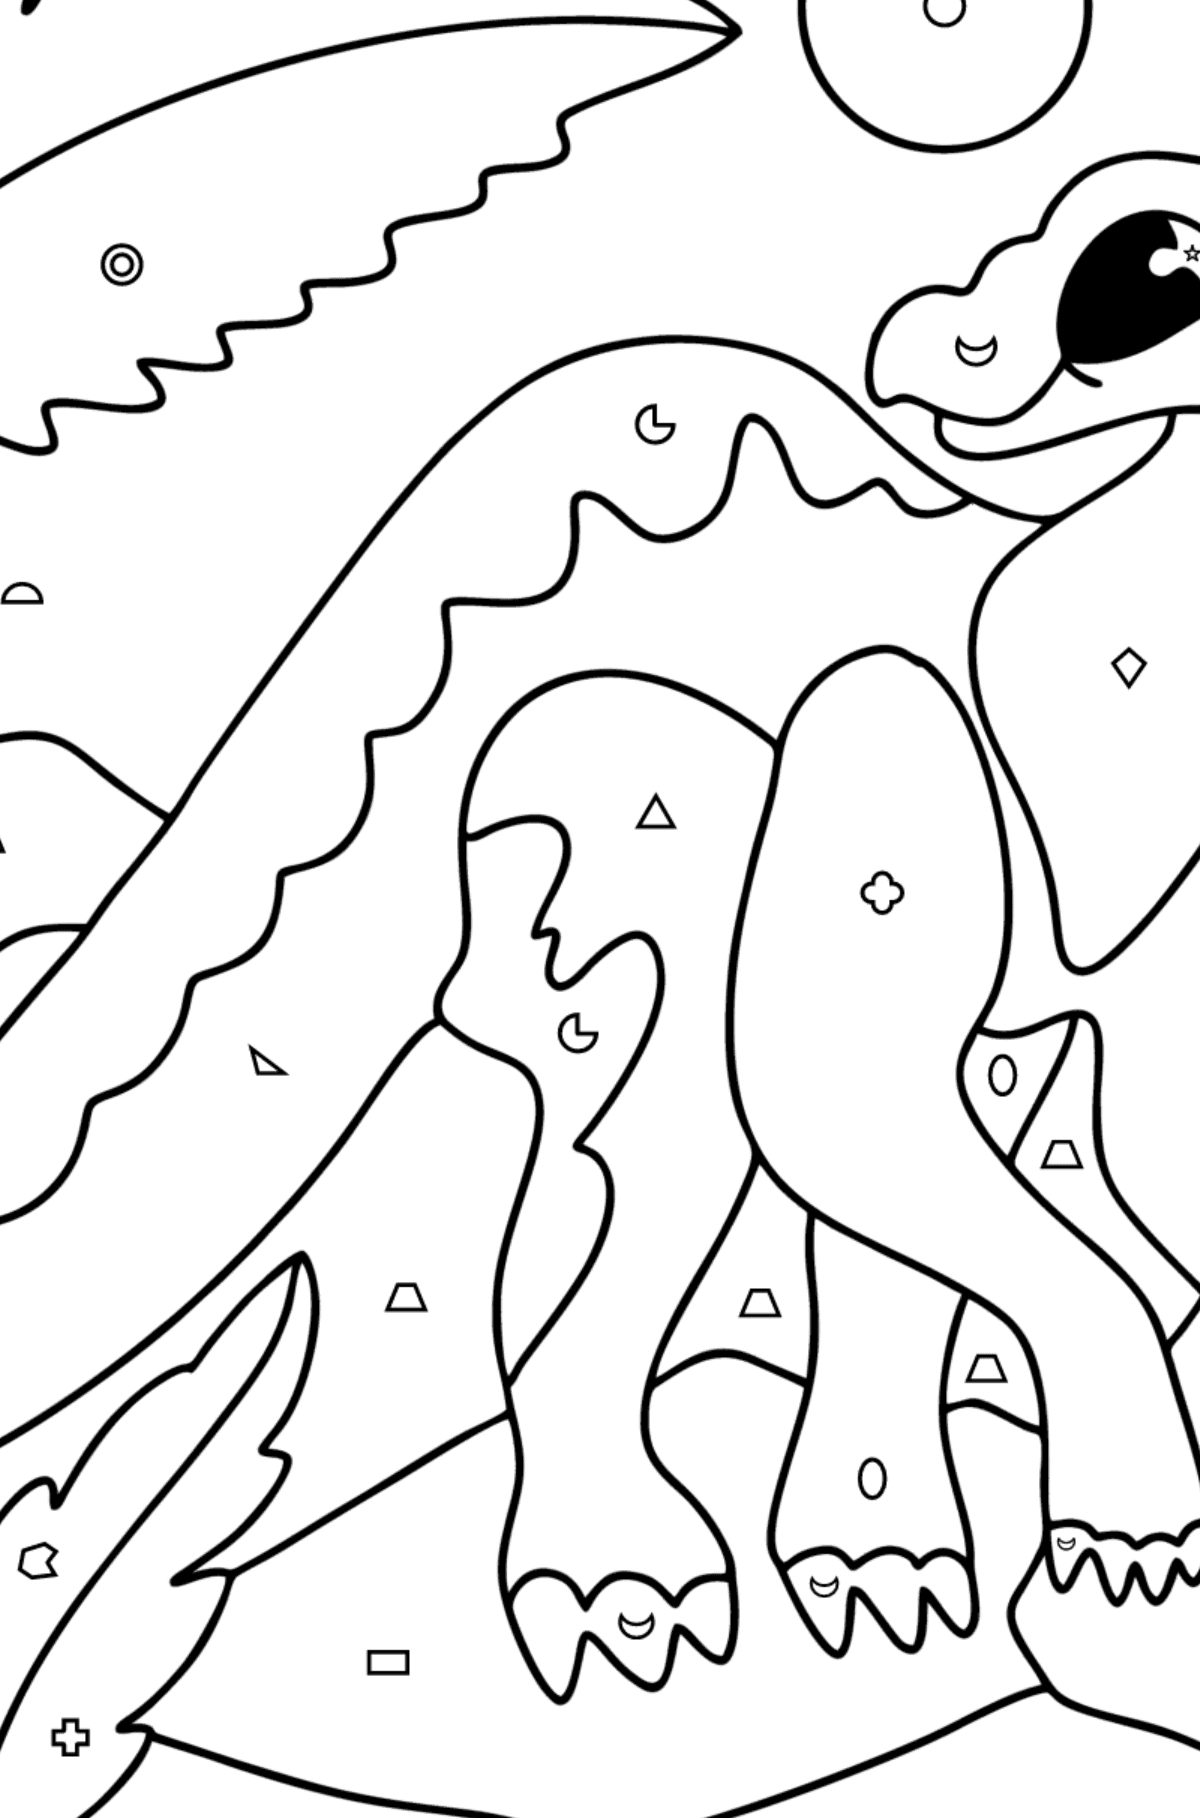 Iguanodon coloring page - Coloring by Geometric Shapes for Kids